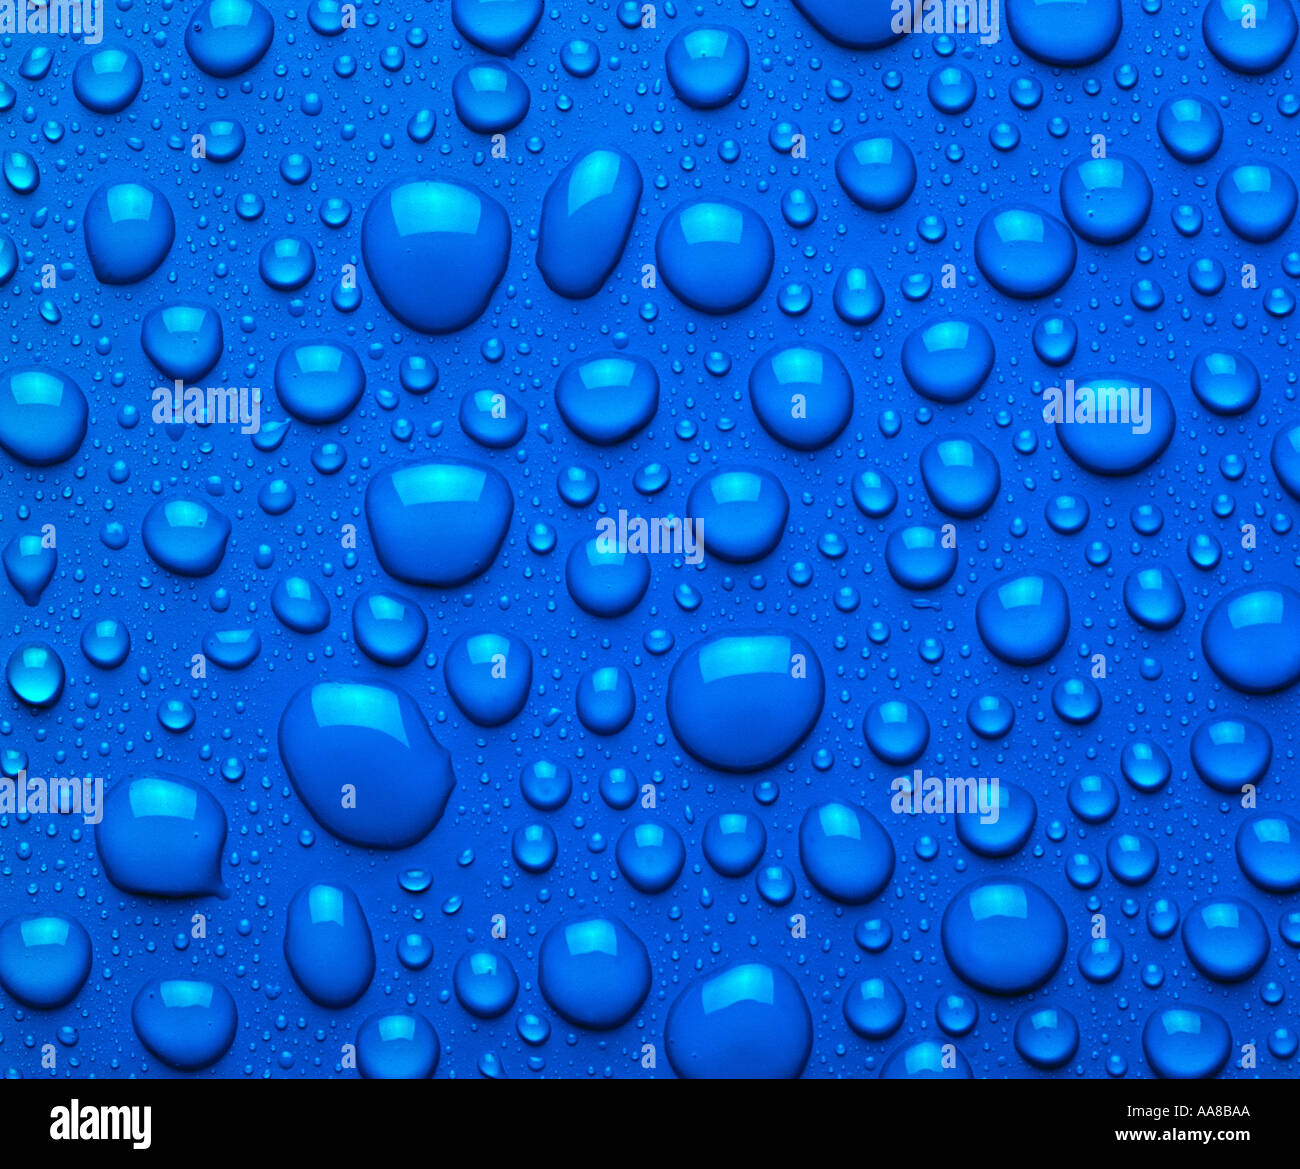 BLUE WATER DROPLETS ON BLUE SURFACE Stock Photo